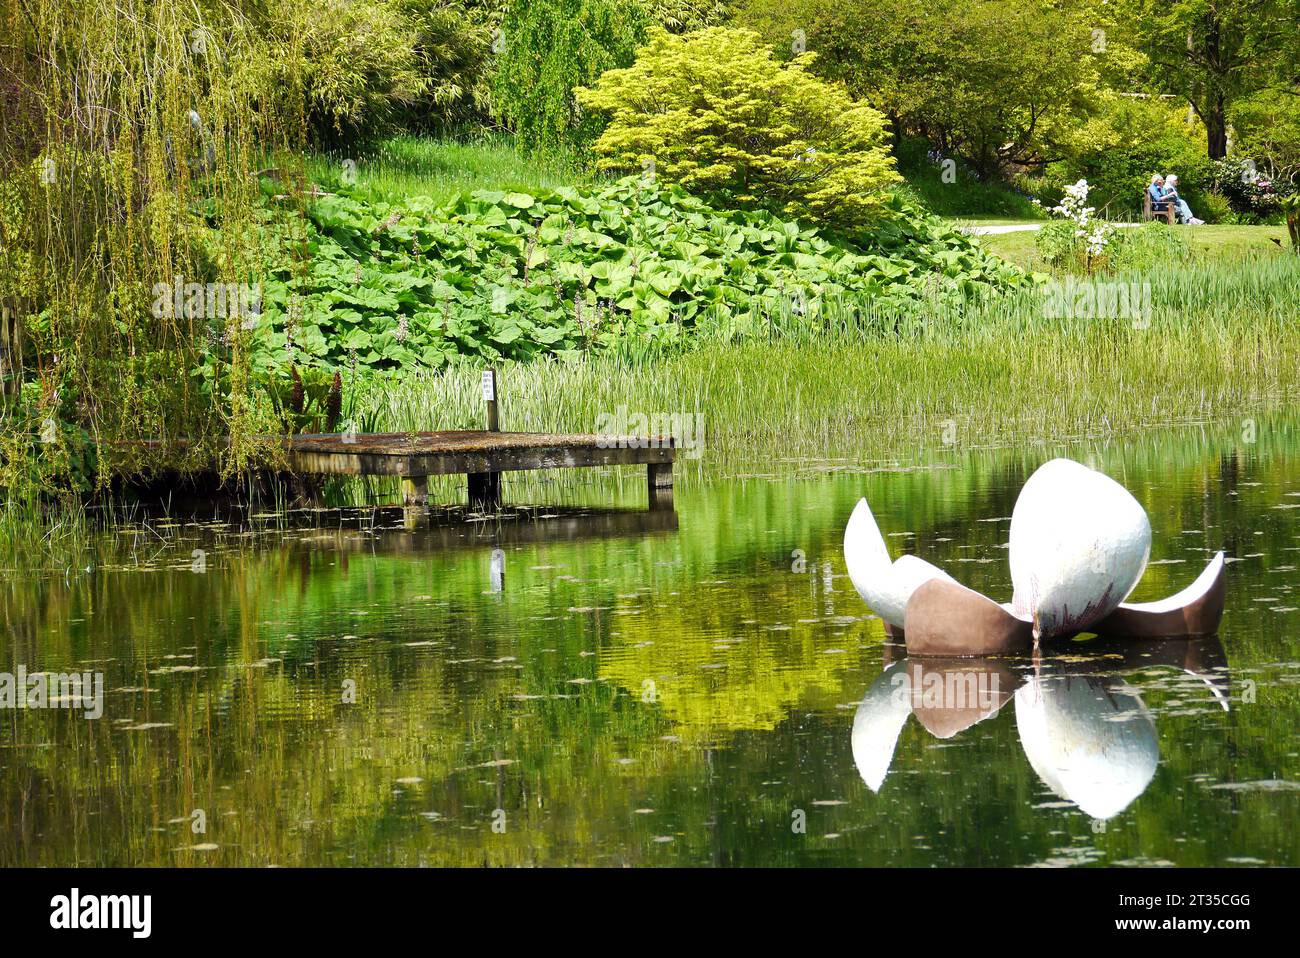 Floating Lily Sculpture & Wooden Pier Reflected in the Magnolia Lake at the Himalayan Garden & Sculpture Park near Ripon, North Yorkshire, England, UK Stock Photo